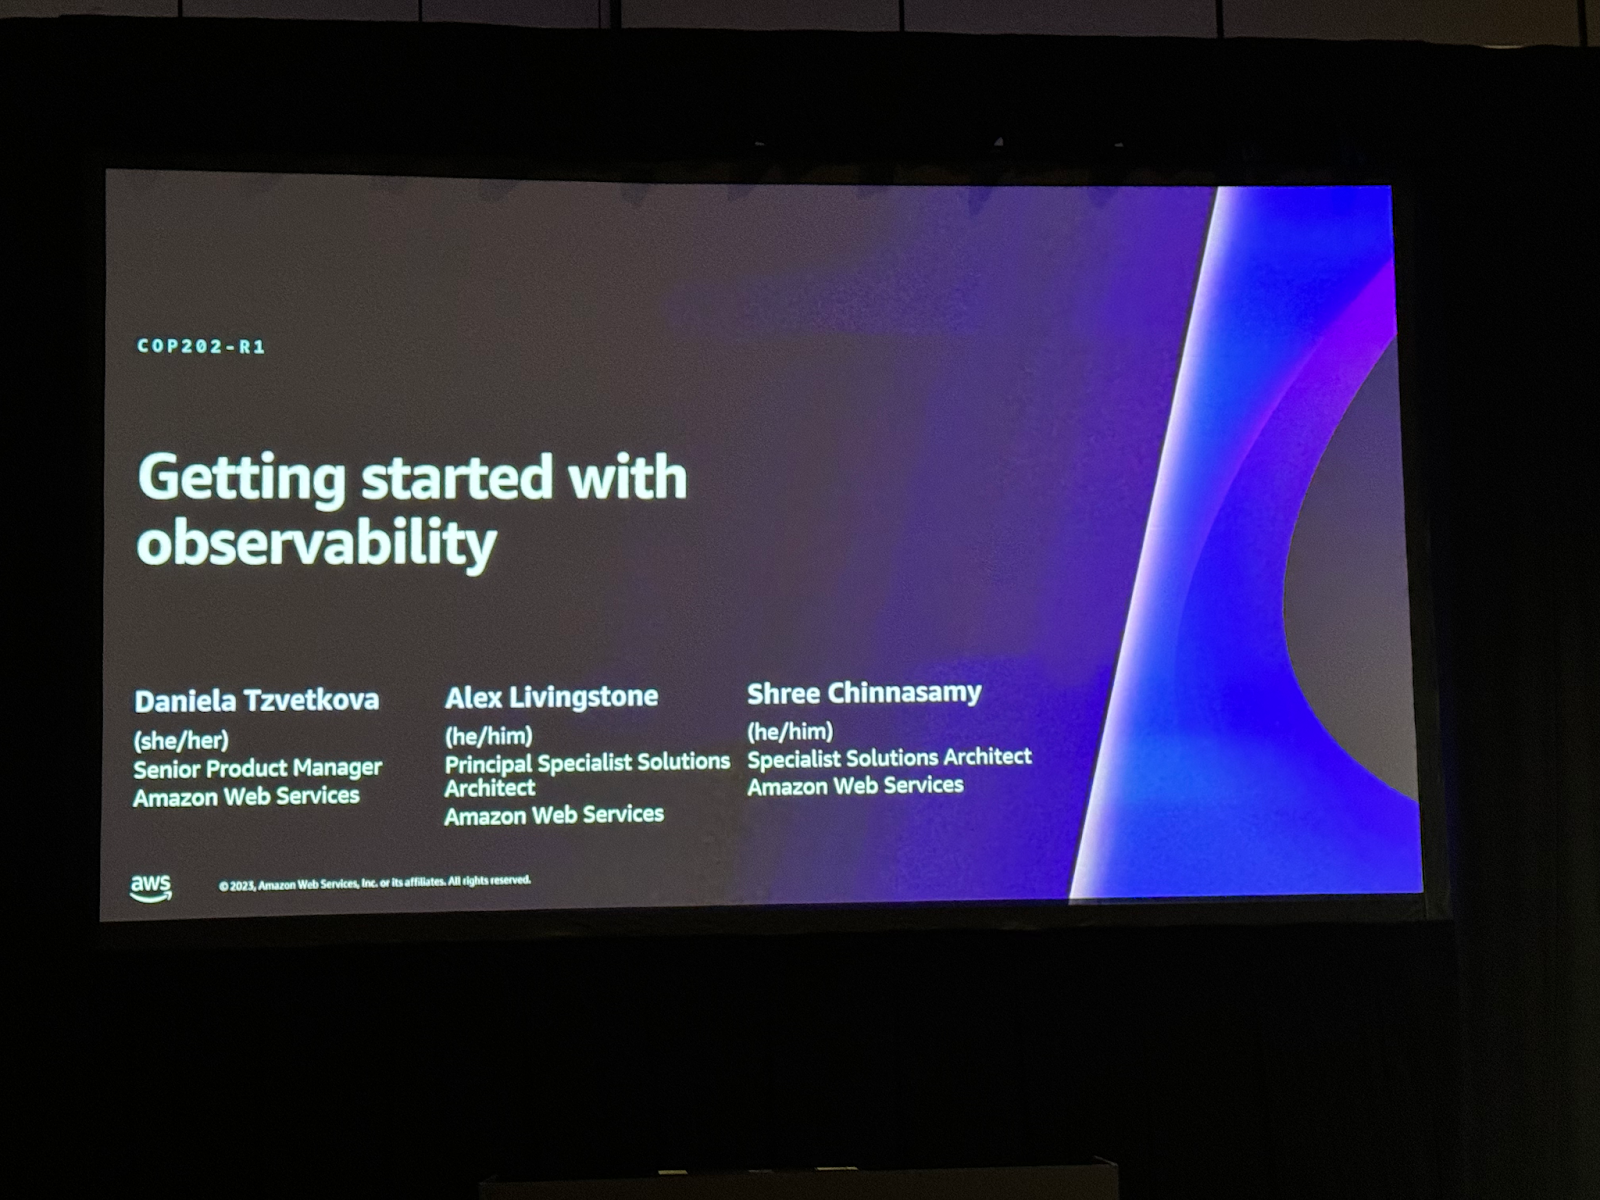 Getting started with observability